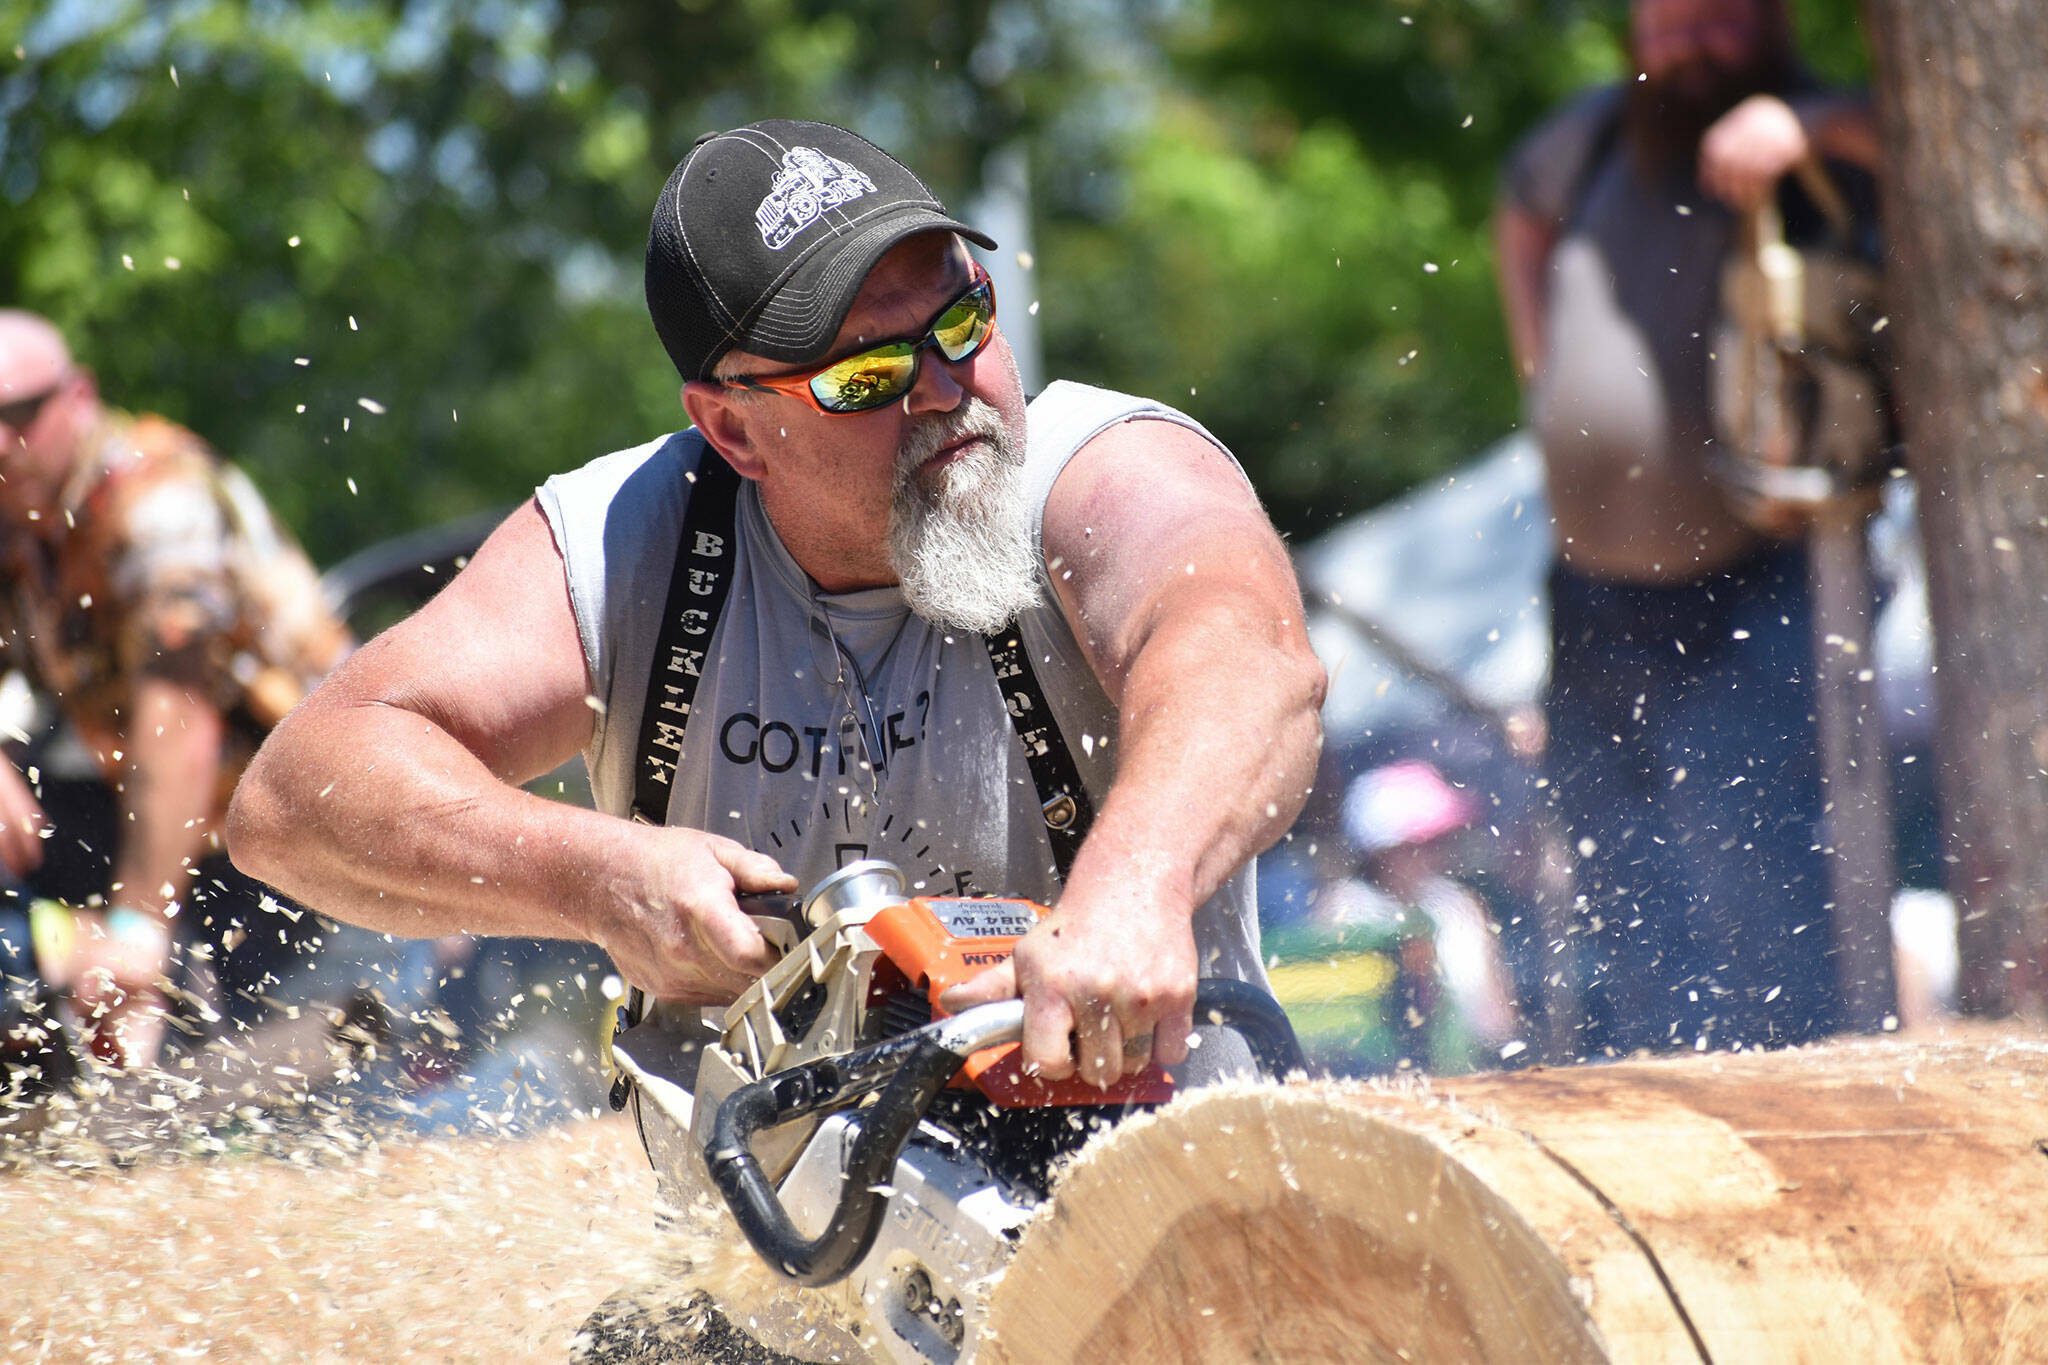 The ever-popular Buckley Log Show will be held on June 24 and 25 at the Log Show grounds. Reigning champ Billy Clinkingbeard clinched All Around Logger for the 8th year in a row last year. Photos by Alex Bruell